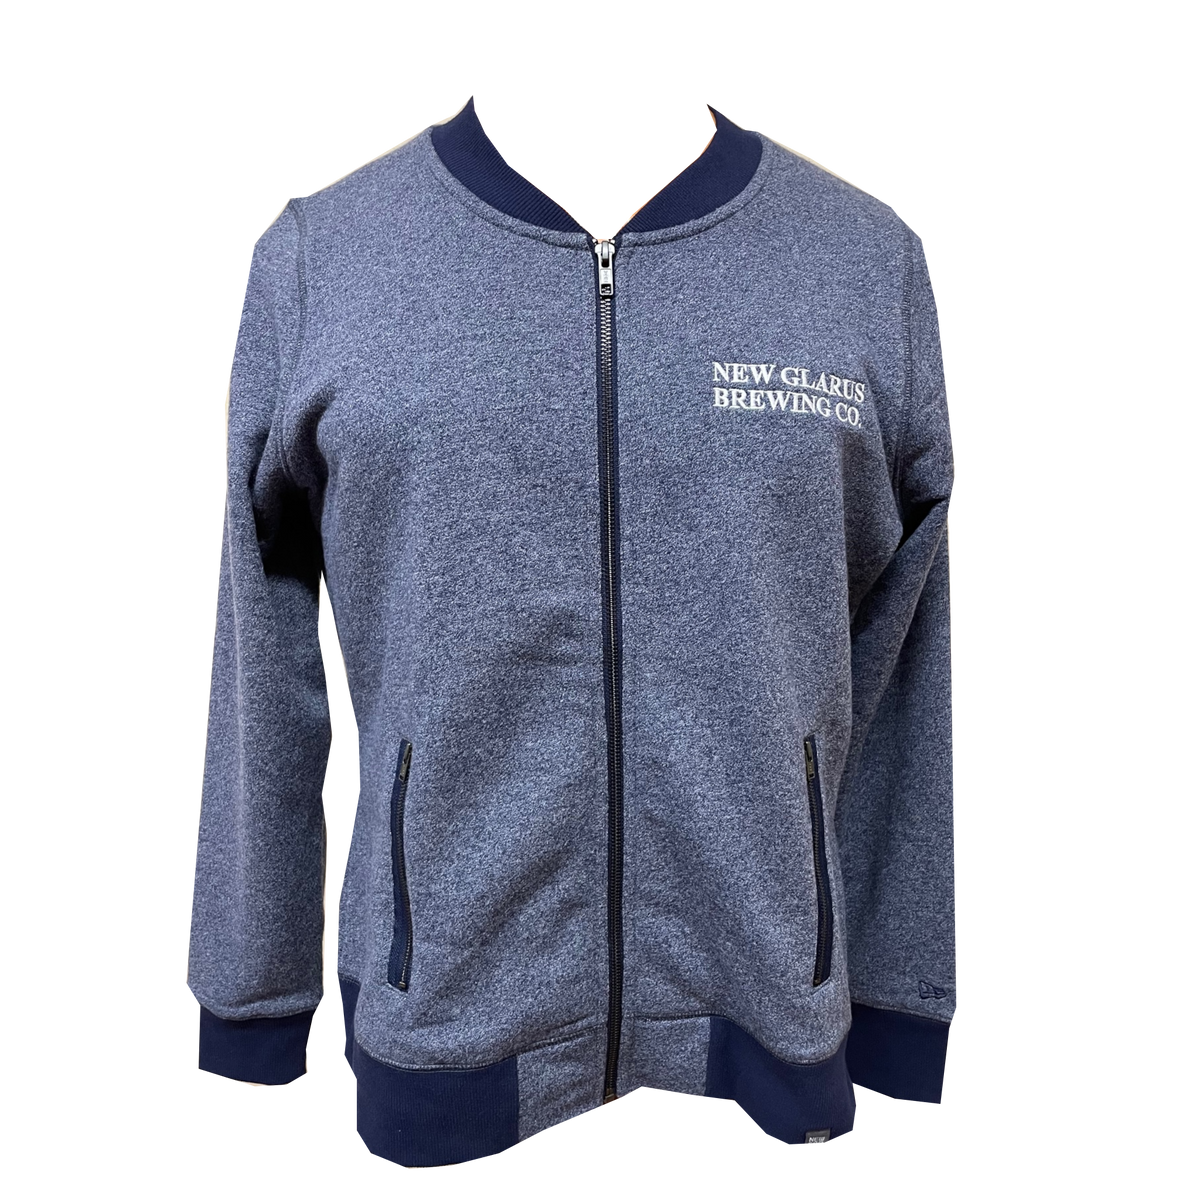 Blue Full zip jacket with darker blue knit cuffs, collar and waist band. Features New Glarus Brewing Co. embroidered in white on the front left chest.